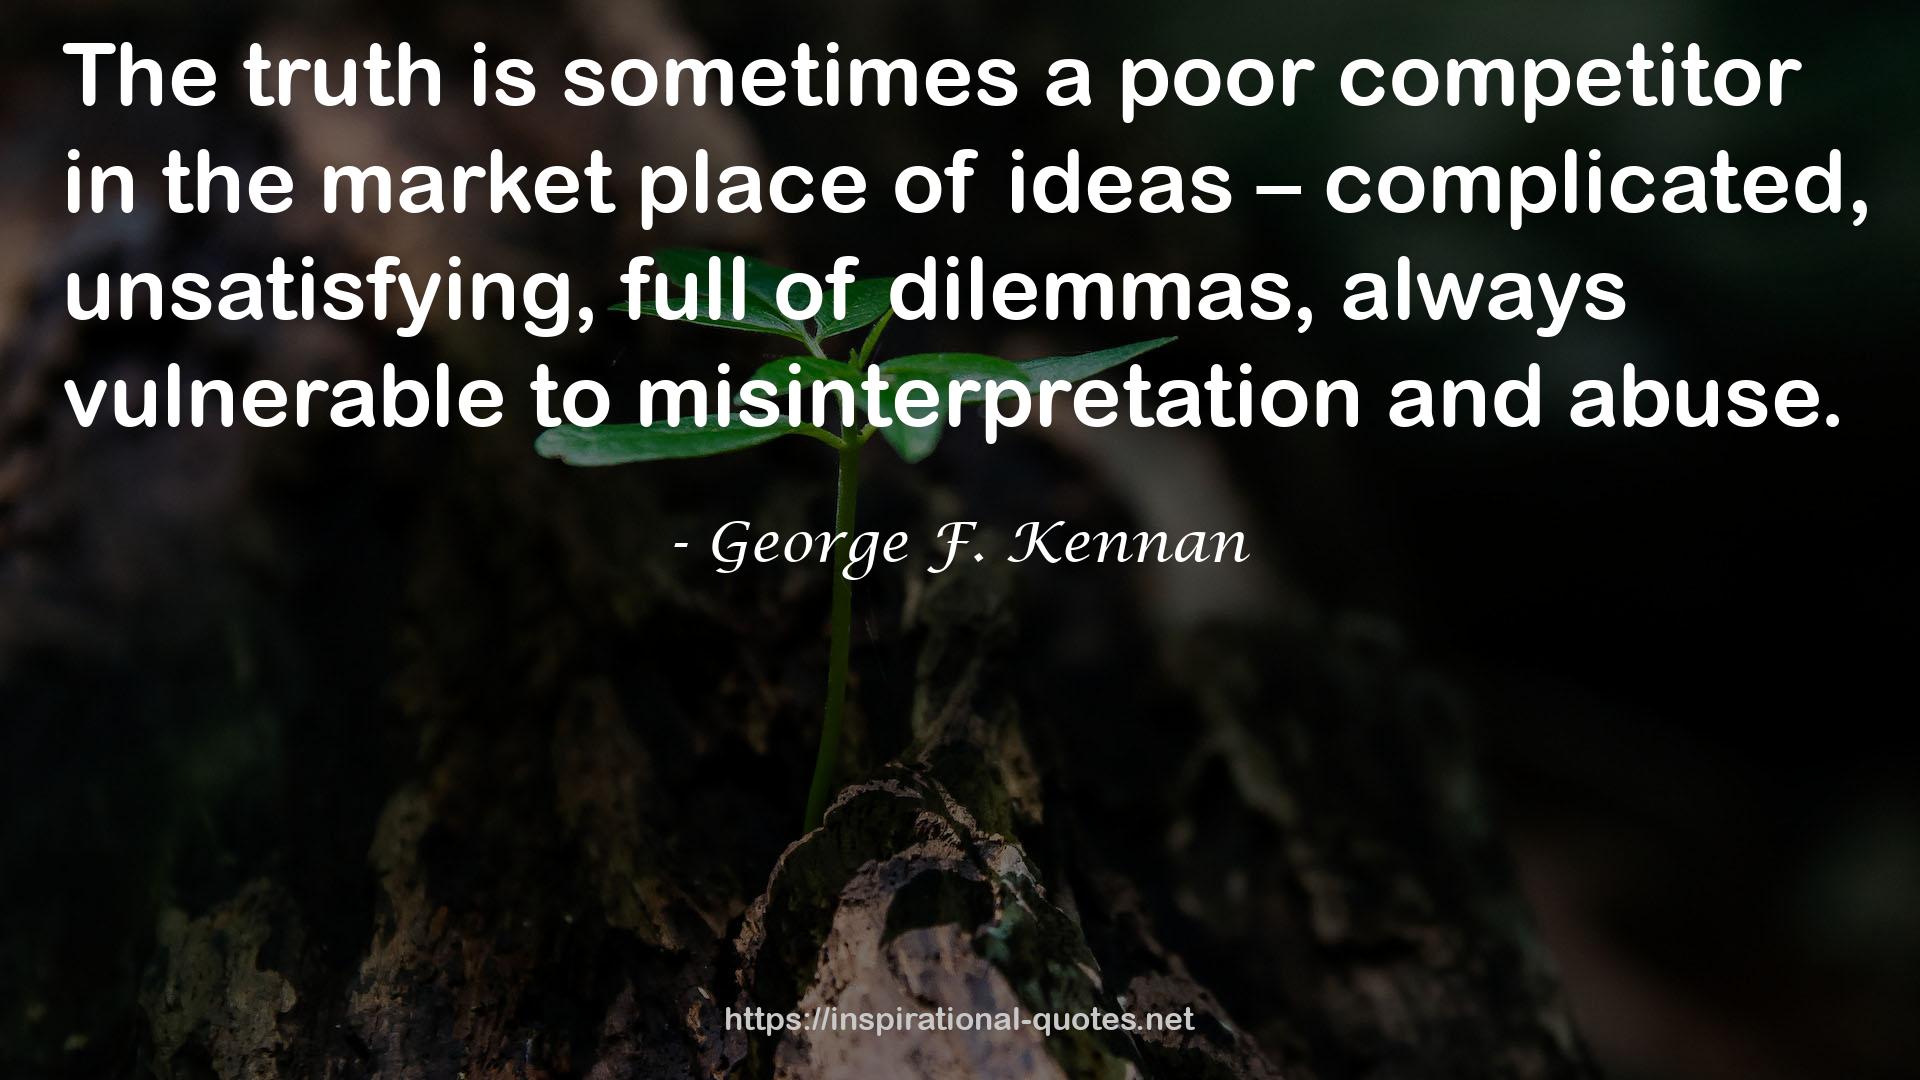 George F. Kennan QUOTES